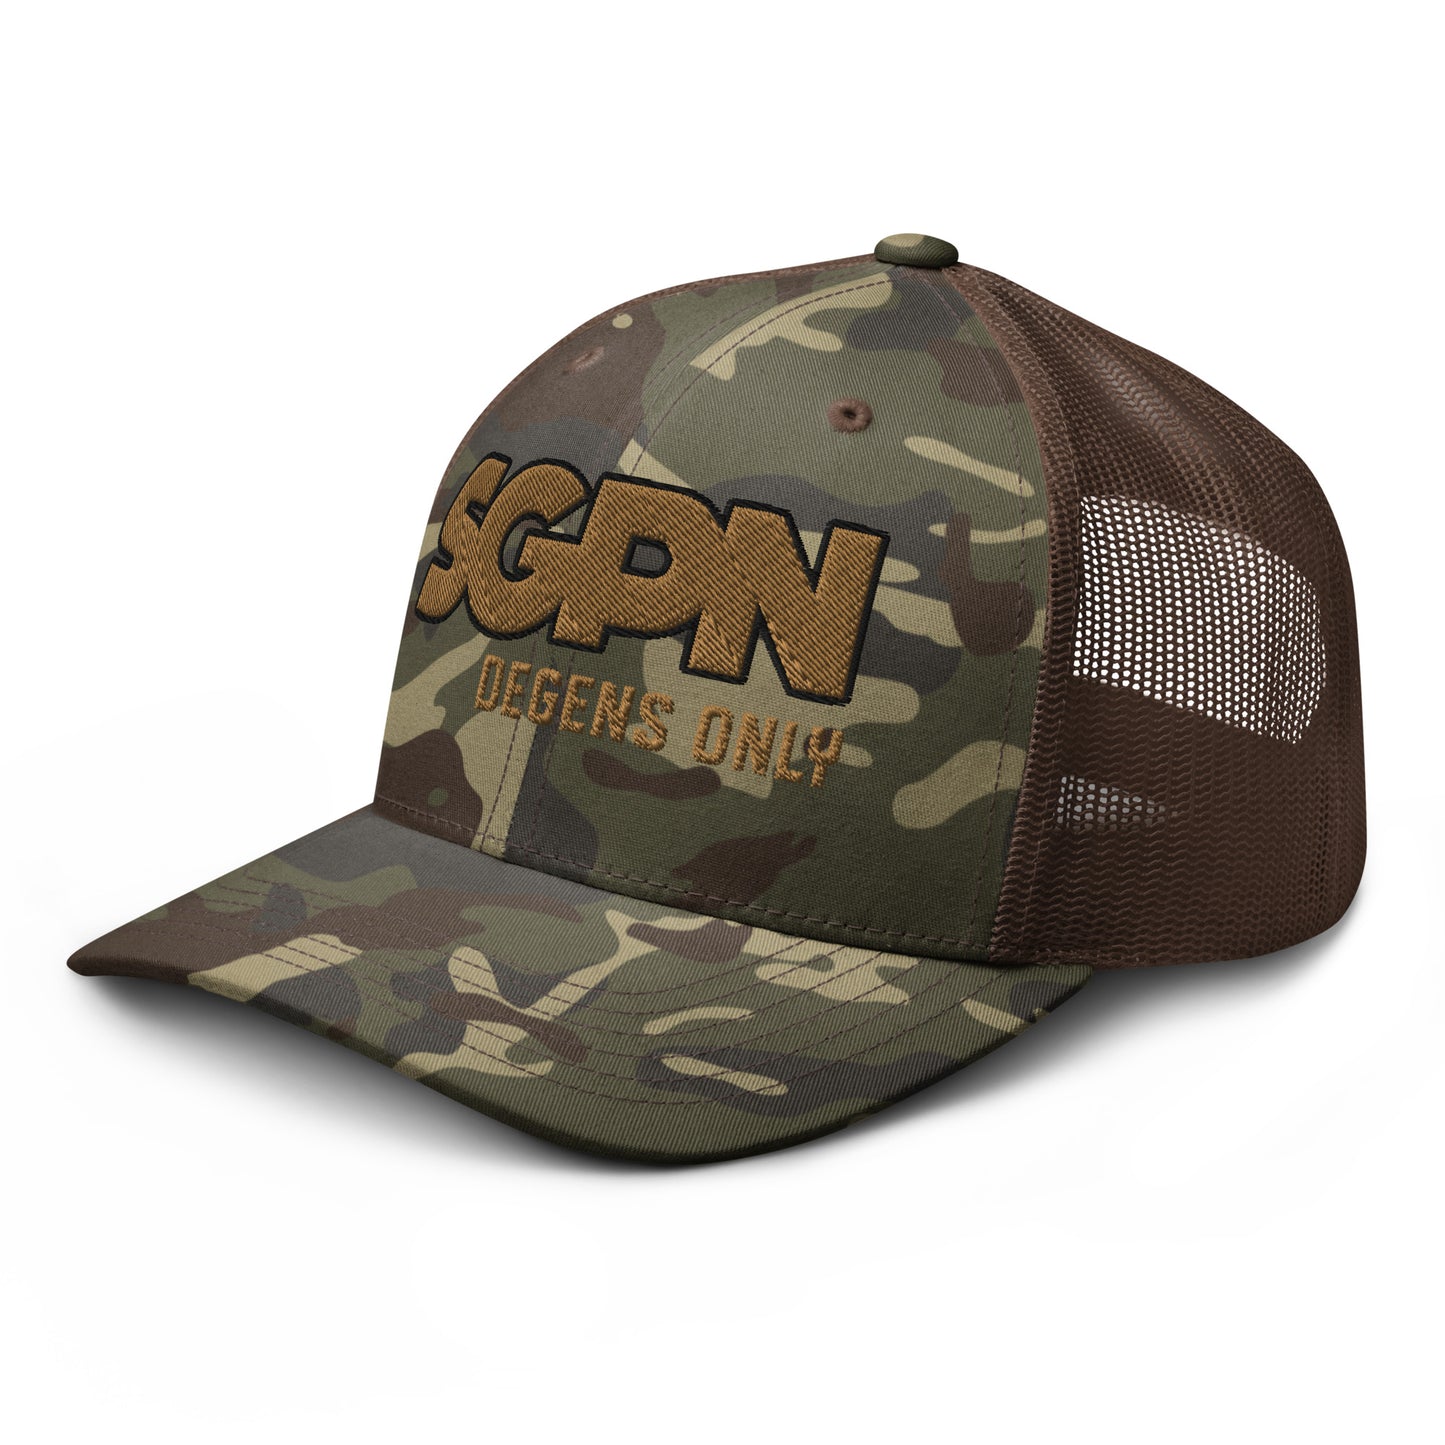 SGPN - Degens Only edition - Camouflage trucker hat - (2 thread color)